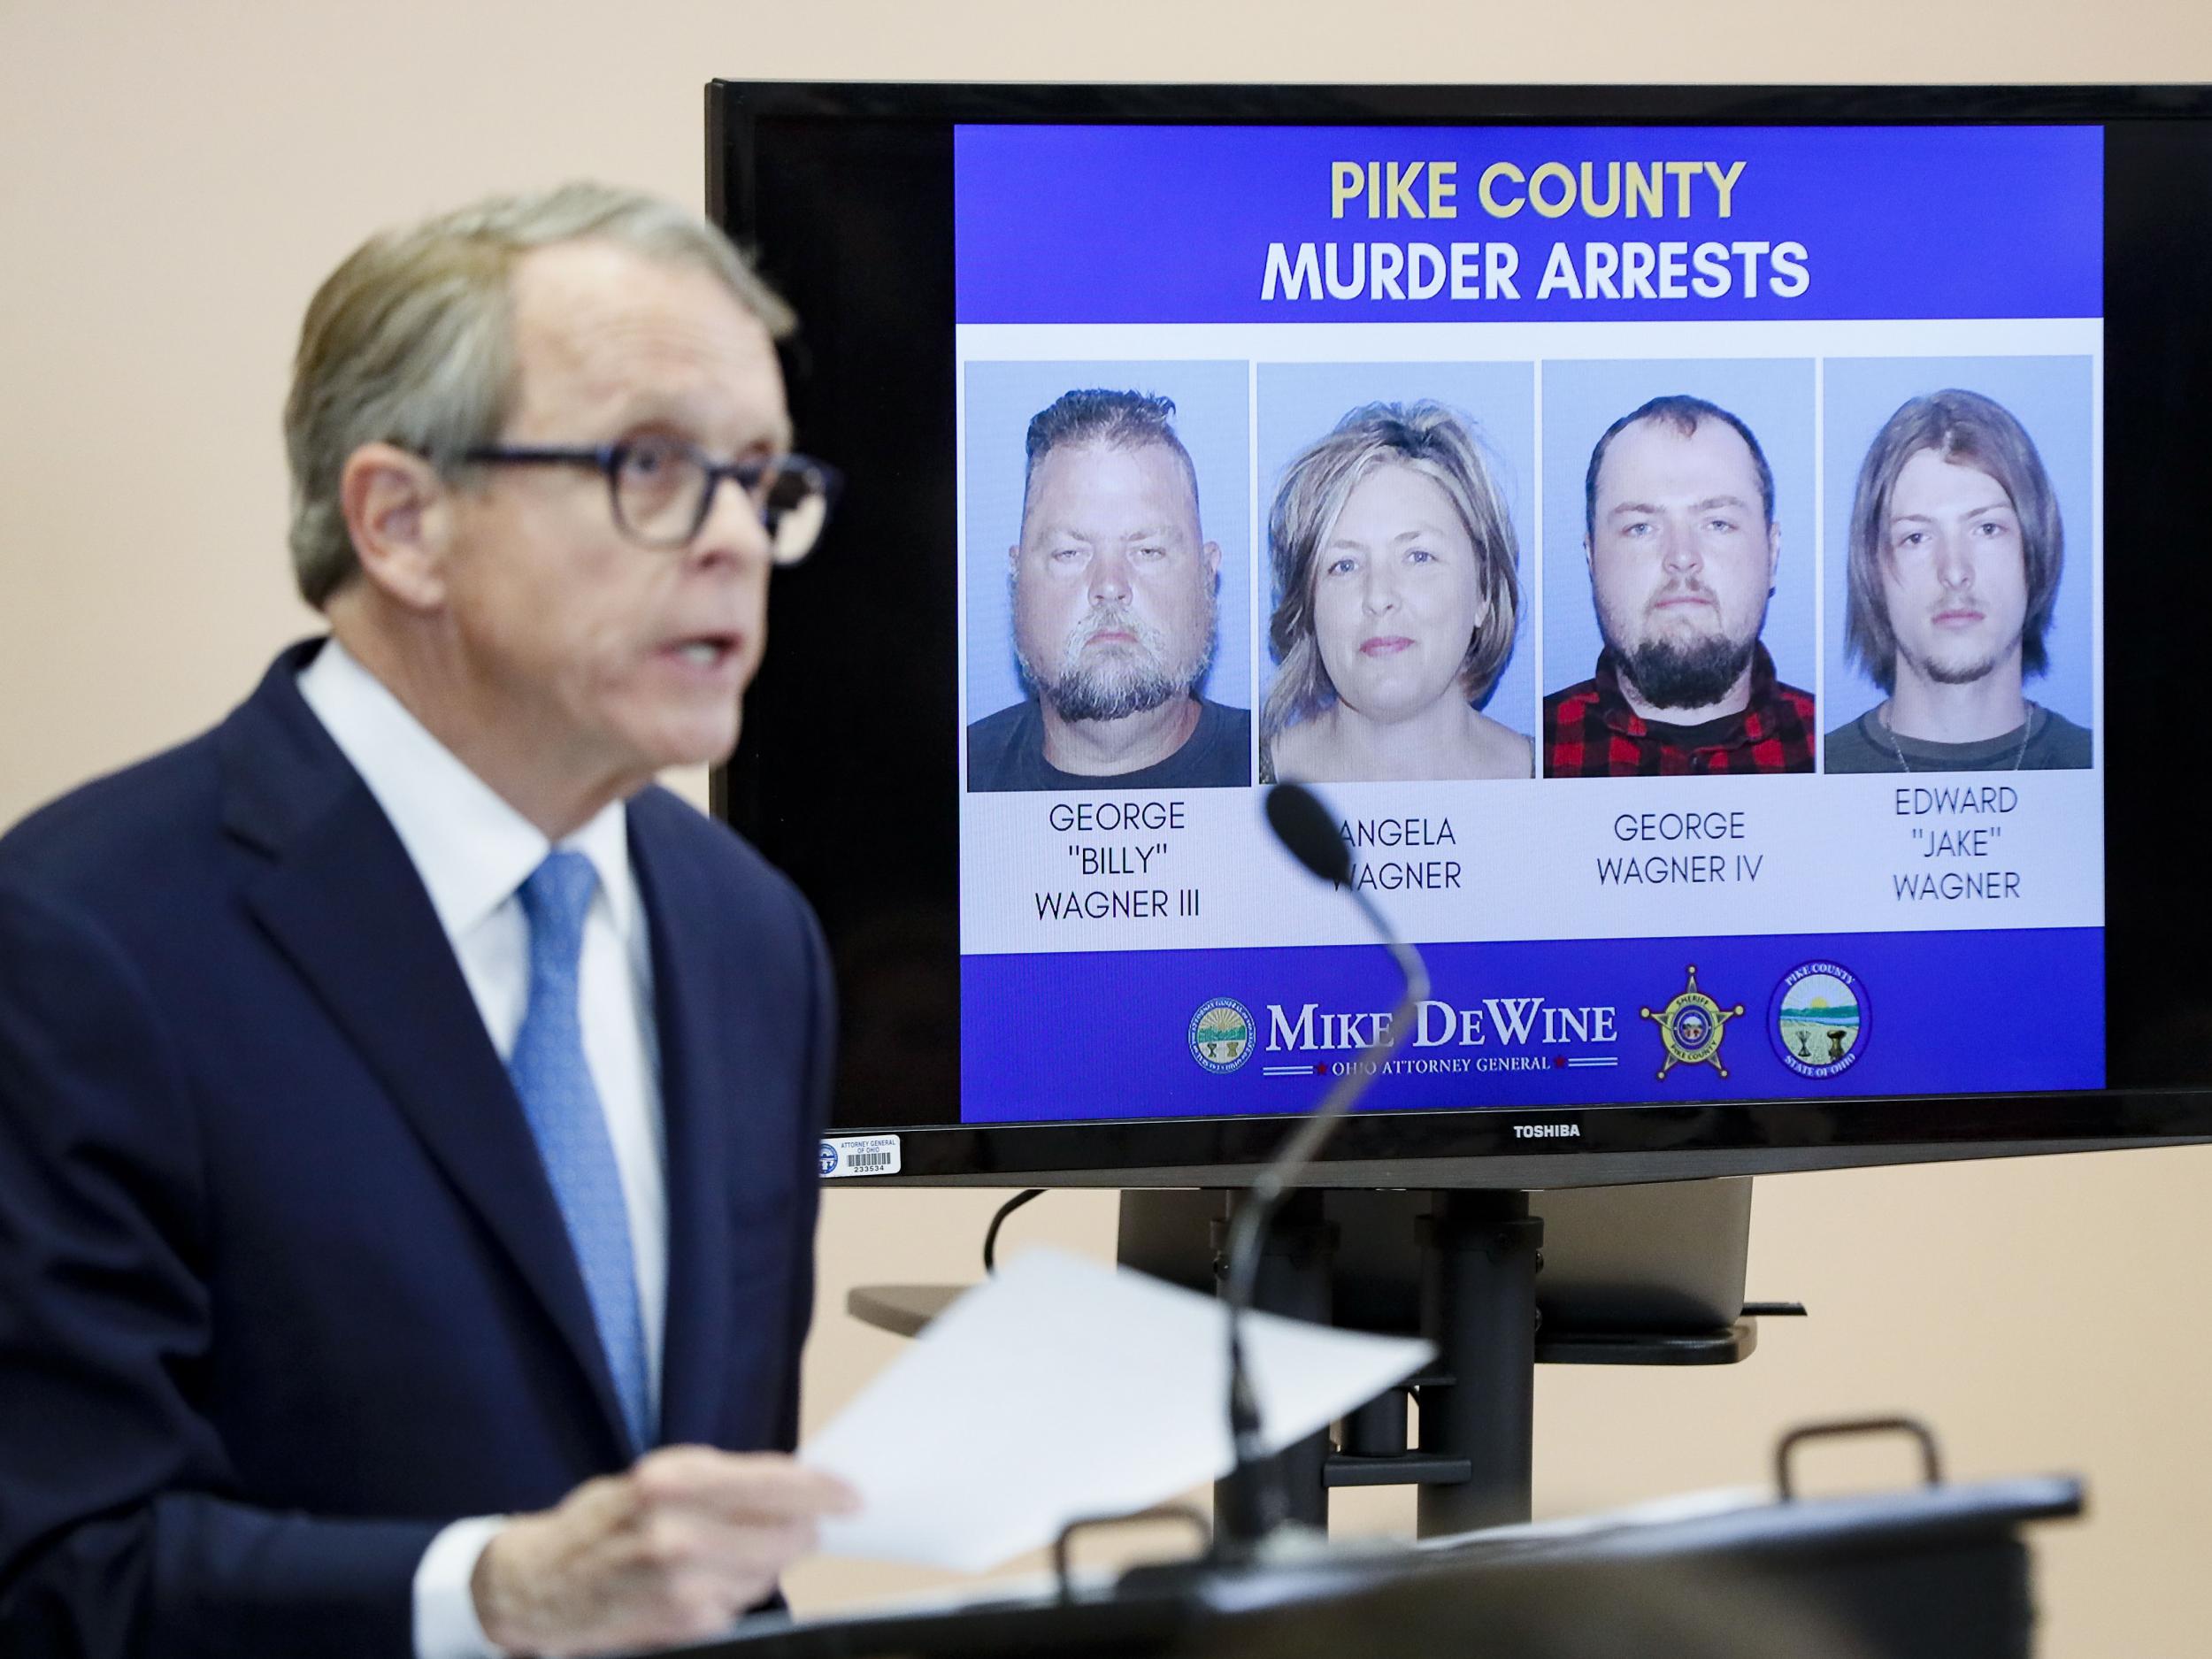 Ohio Attorney General Mike DeWine speaks alongside a display of those arrested during a news conference